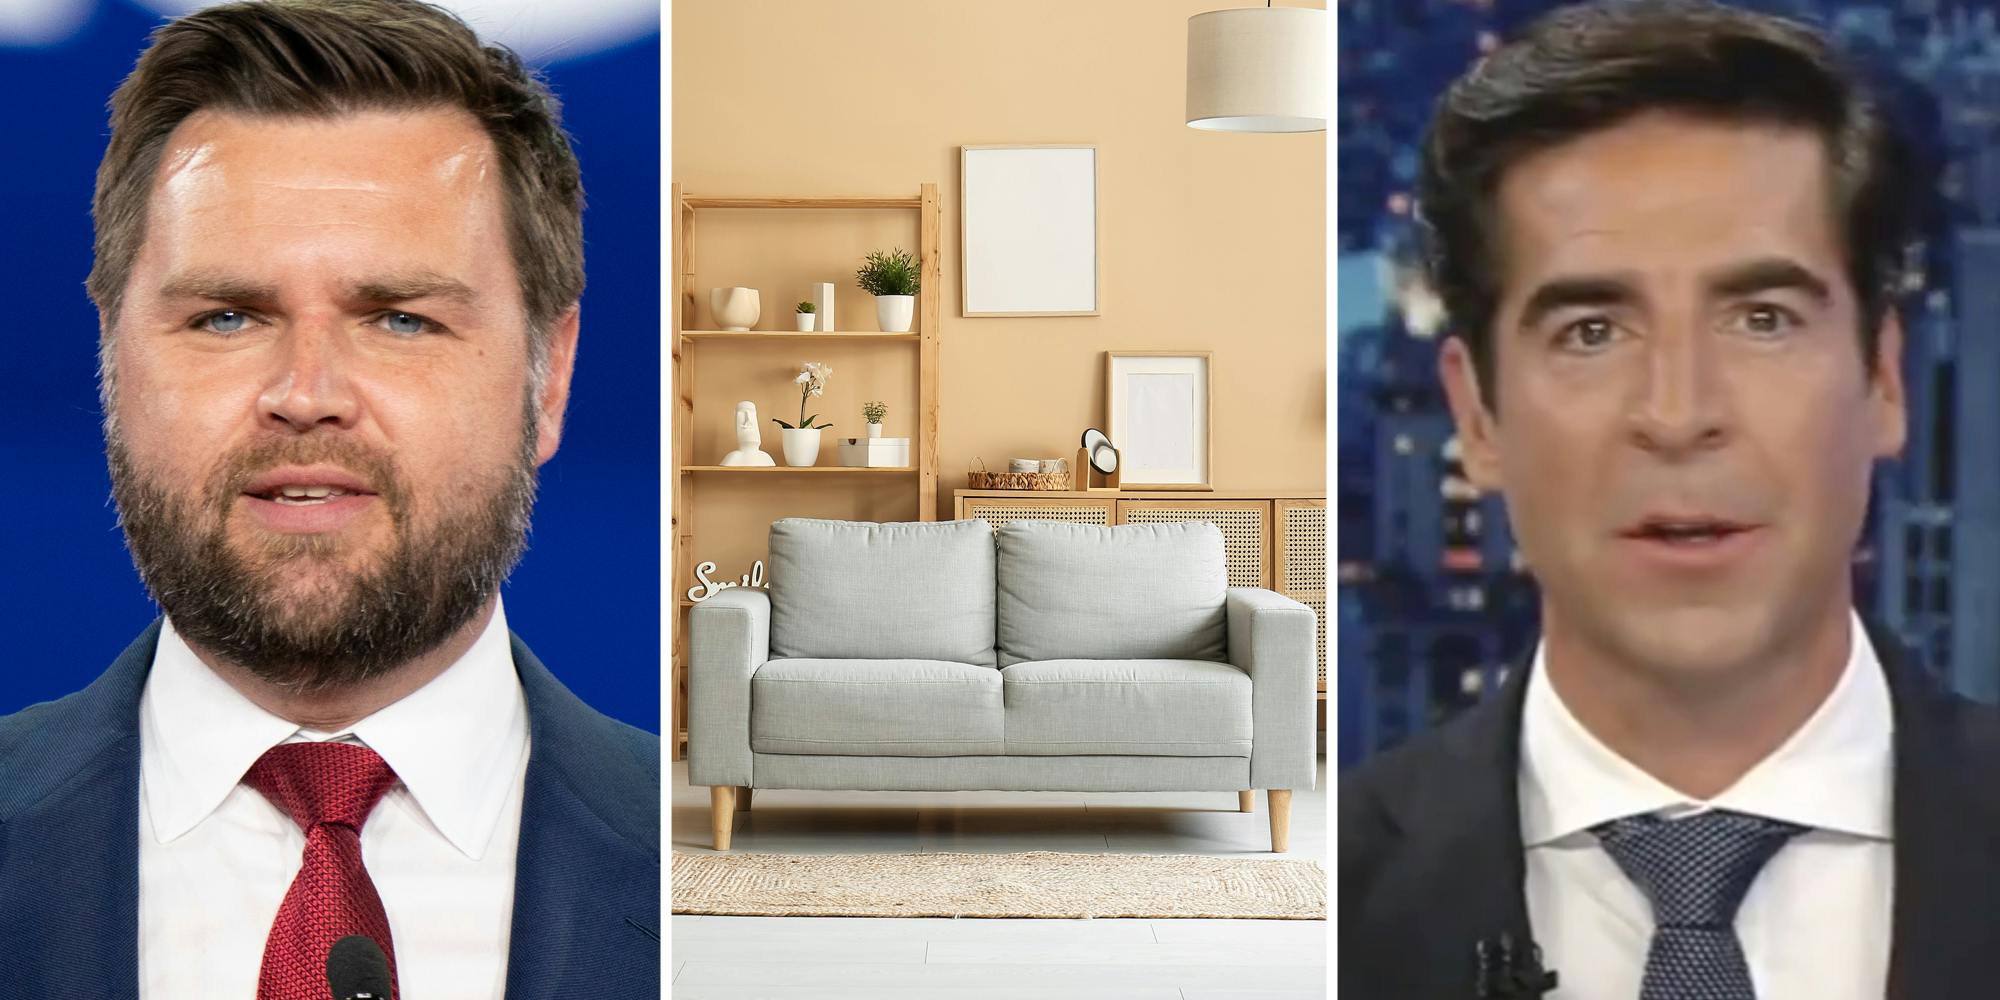 JD Vance(l), couch in living room(c), News anchor(r)